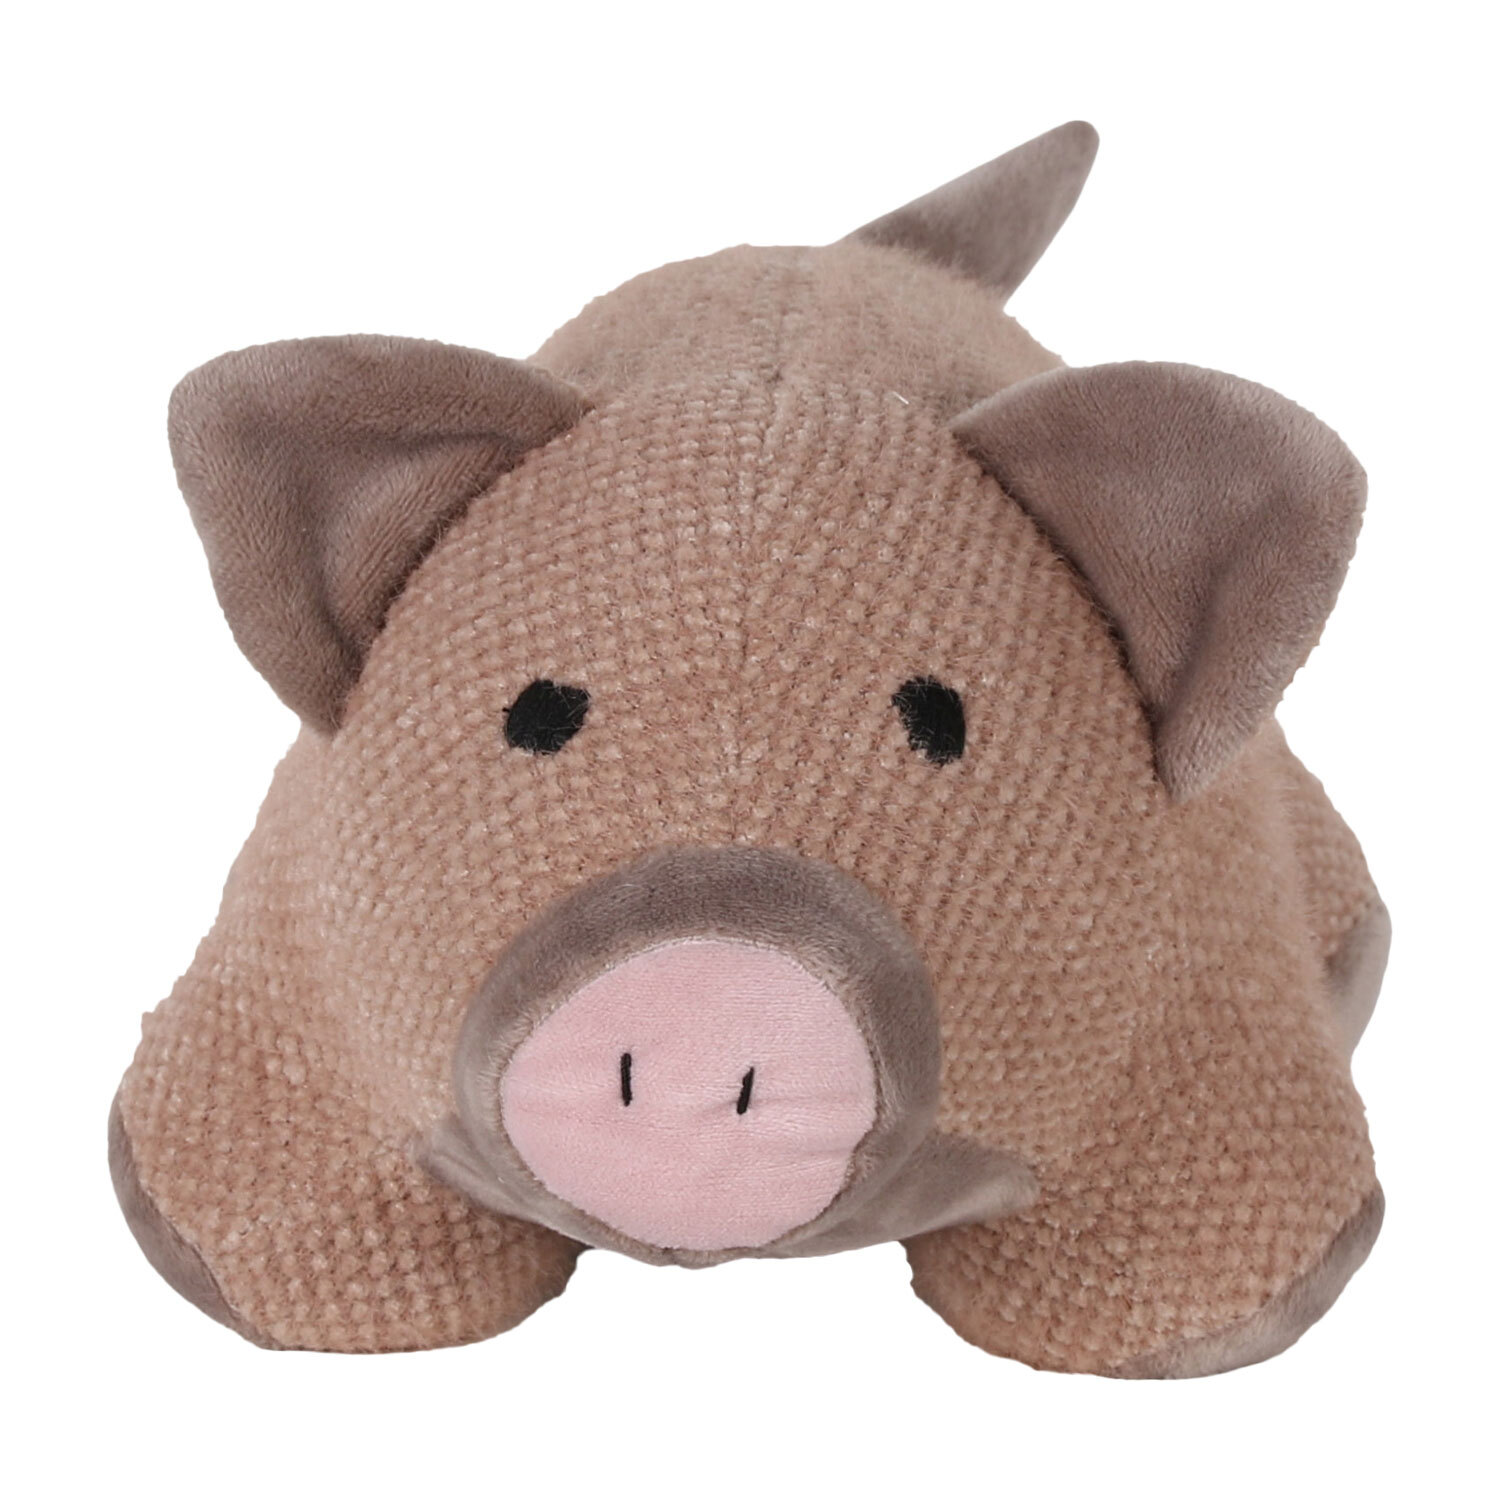 Polly the Pig Decorative Doorstop Image 1